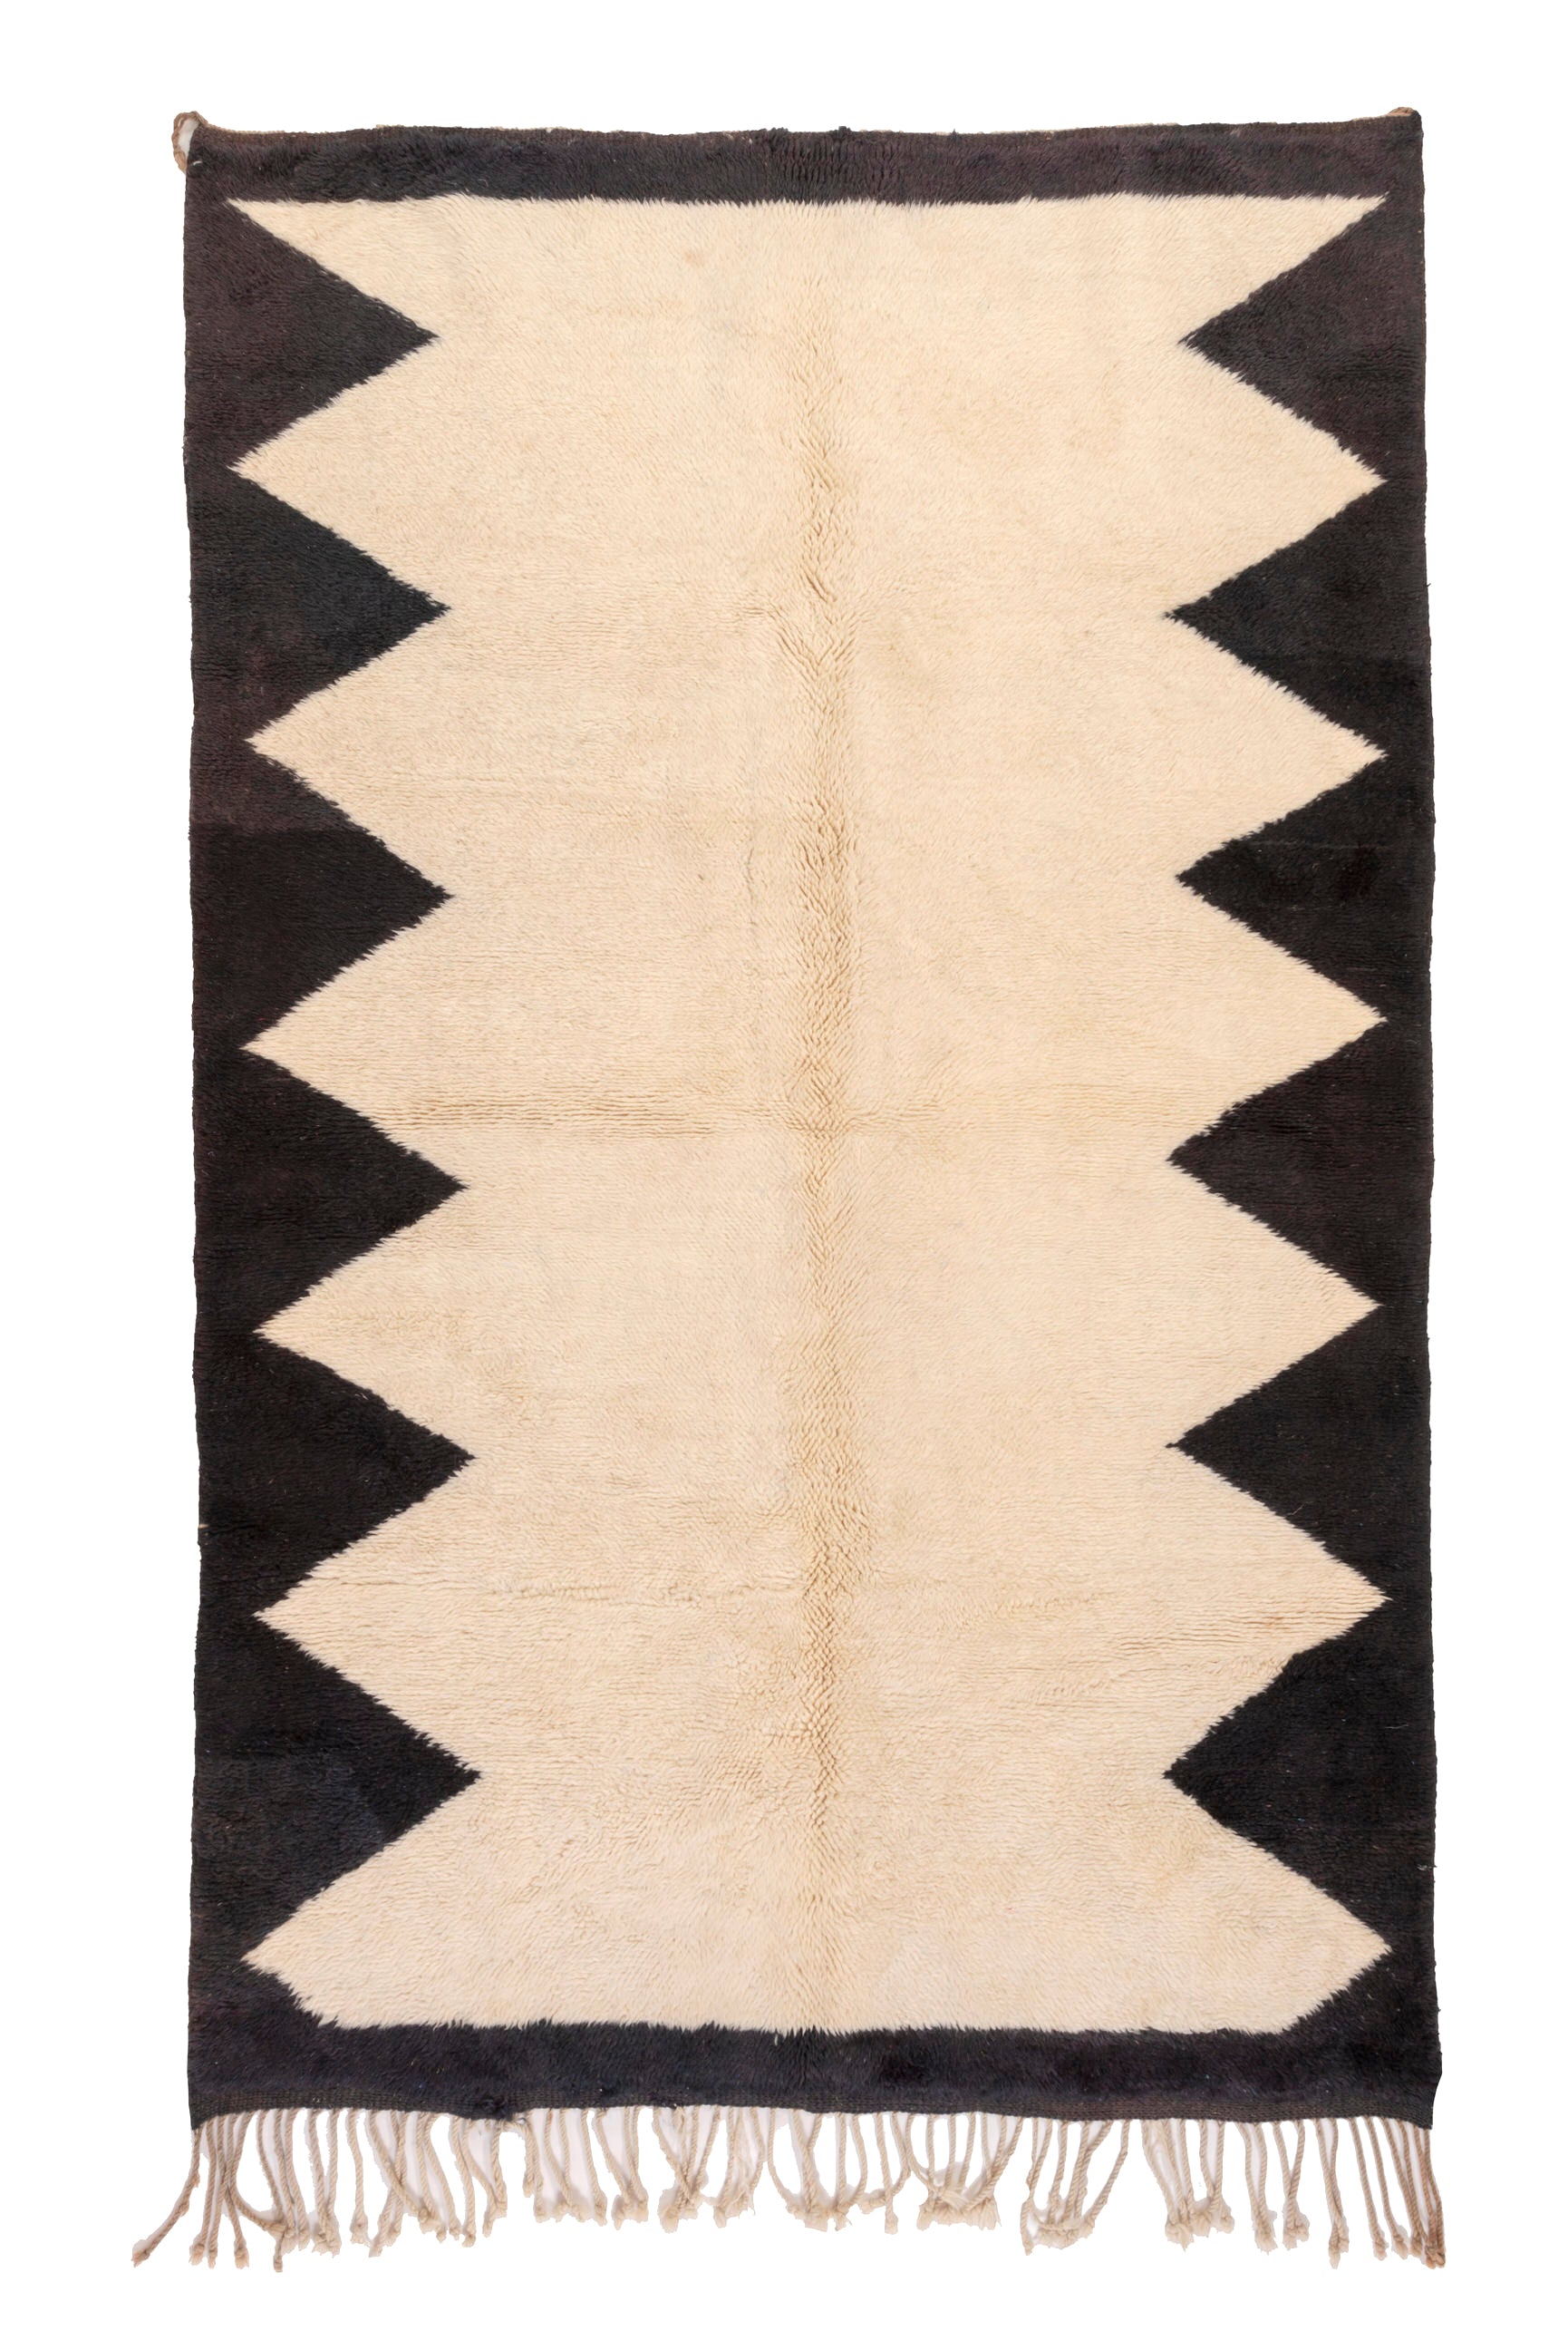 Elevate your space with our Ivory Triangle Border Beni Ourain Rug. This classic piece features a timeless ivory base adorned with a striking black triangle border, creating a harmonious blend of traditional Moroccan design and modern elegance. Crafted with care, this rug adds a touch of sophistication to your decor, making it a perfect addition to your home.